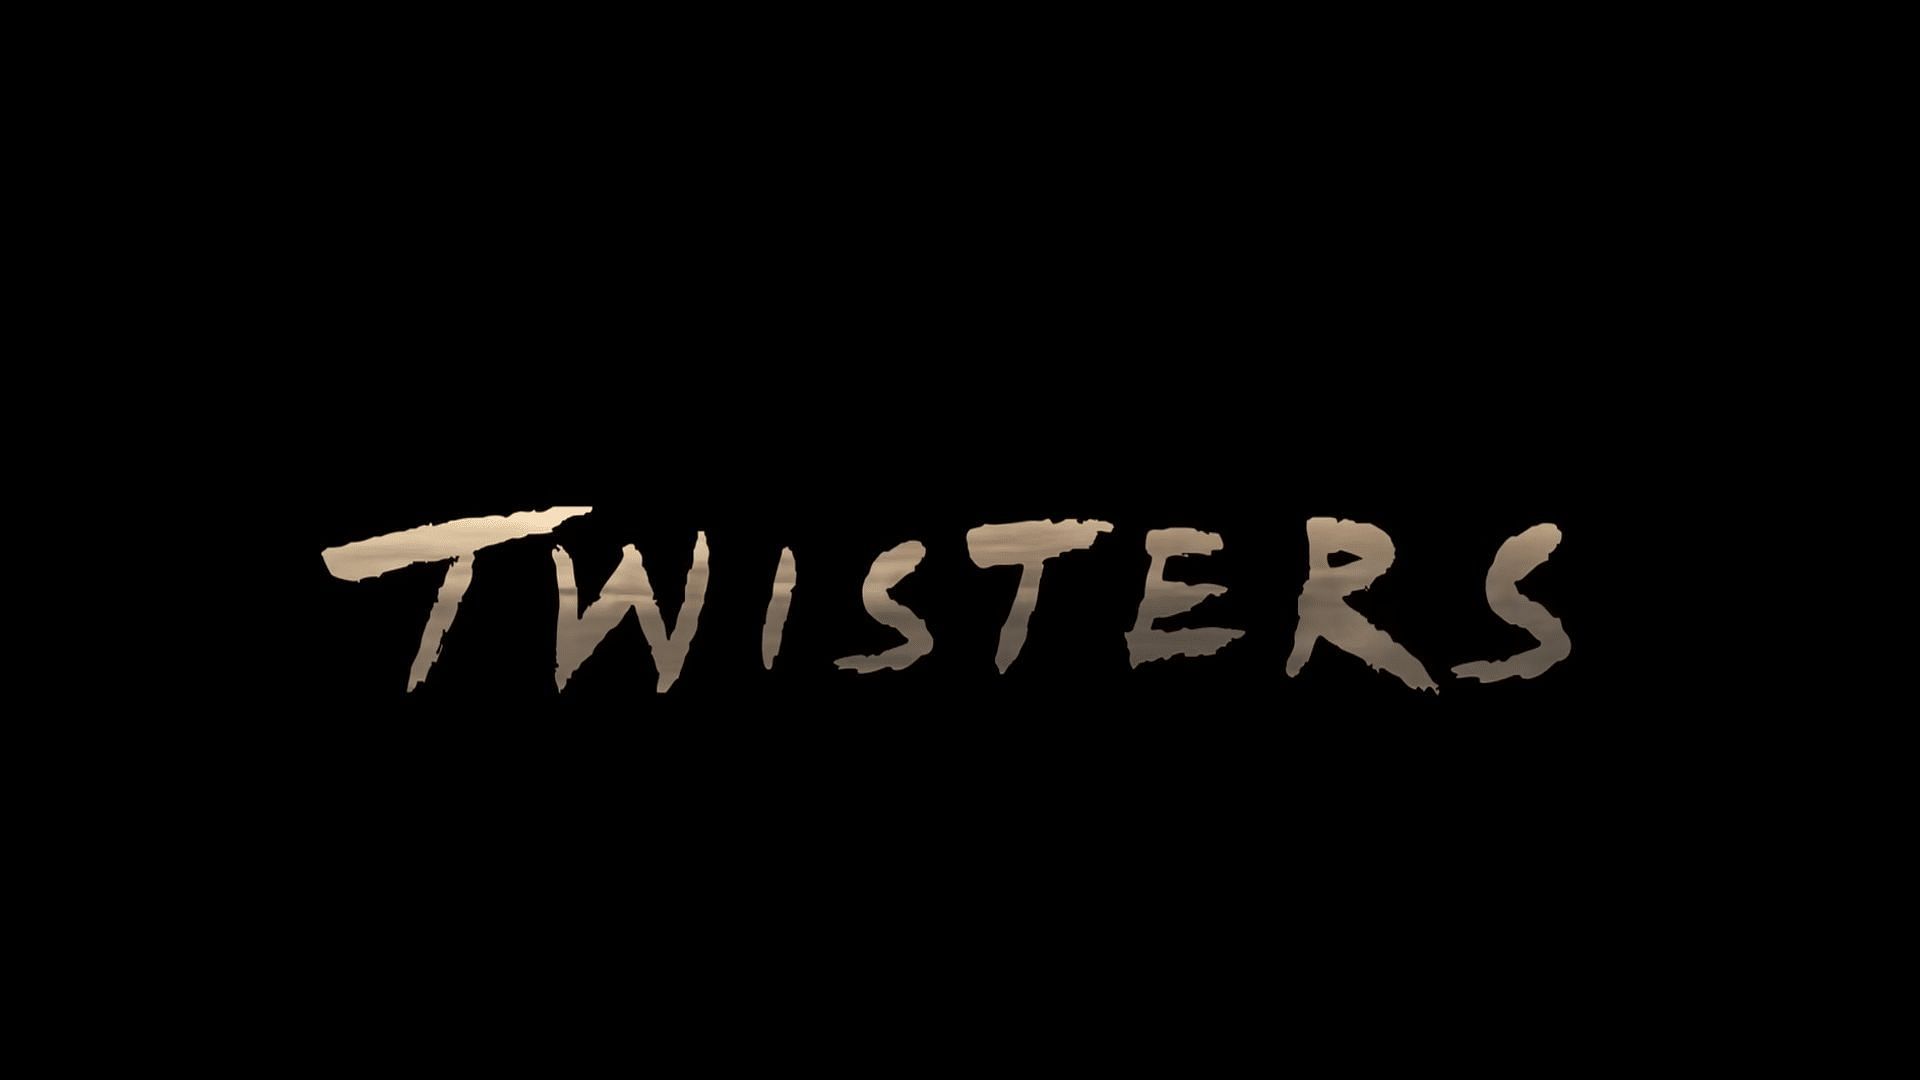 A poster from the trailer of the film Twisters (Image by Universal Pictures)